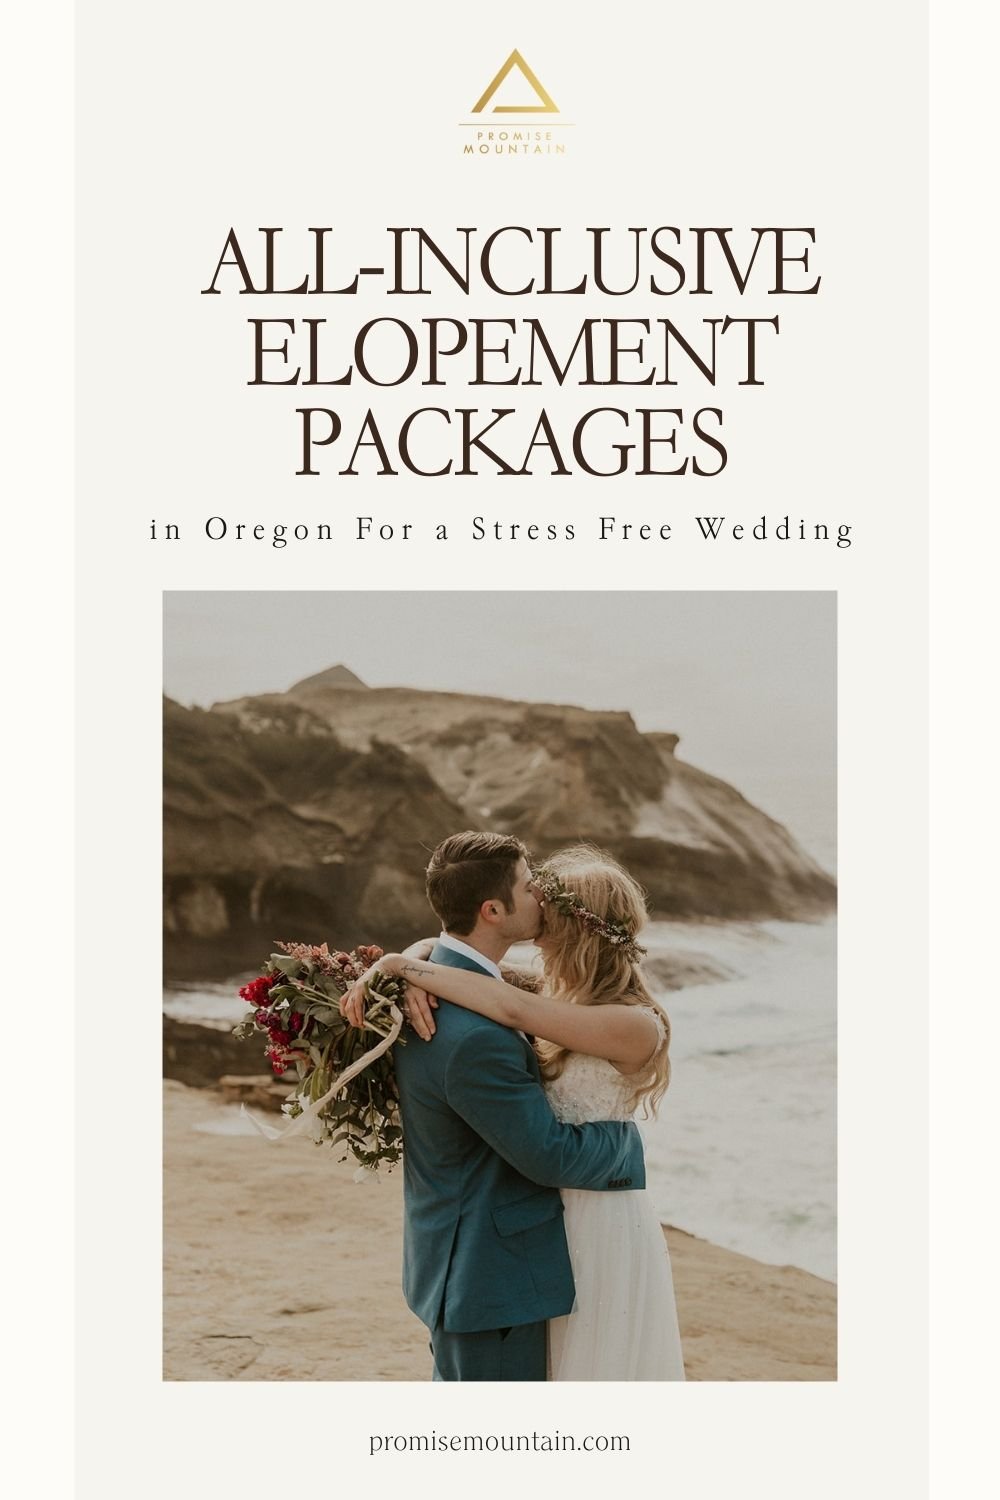 Groom planting a kiss on the bride's forehead during their beach elopement shoot; image overlaid with text that reads All-Inclusive Elopement Packages in Oregon for a Stress Free Wedding